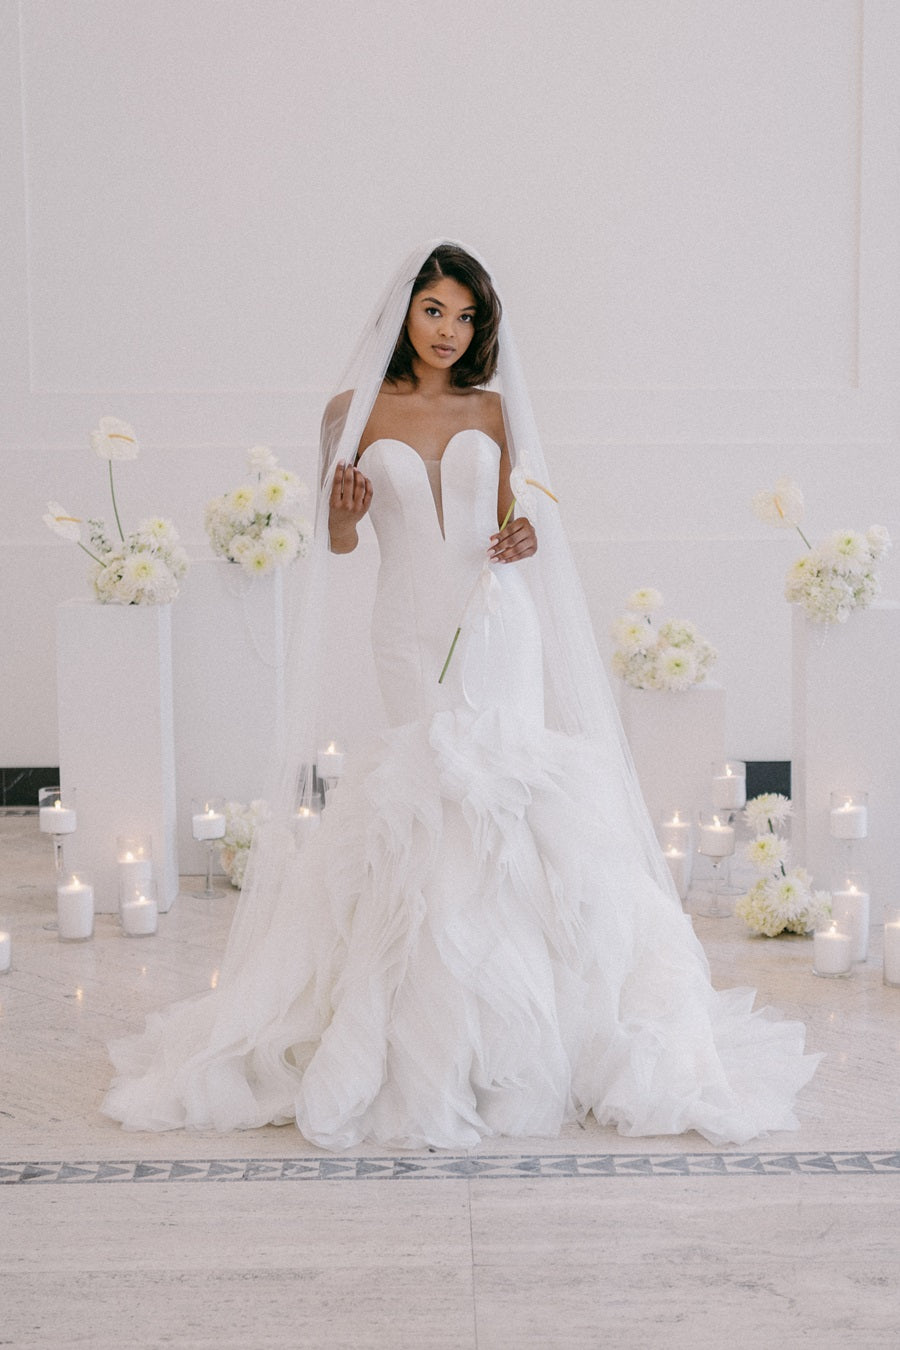 Bride in white gown with a full skirt and veil. She holds a flower in one hand and is framed by floral arrangements in the background. Lit candles are placed in sets along the base of the pedestals.